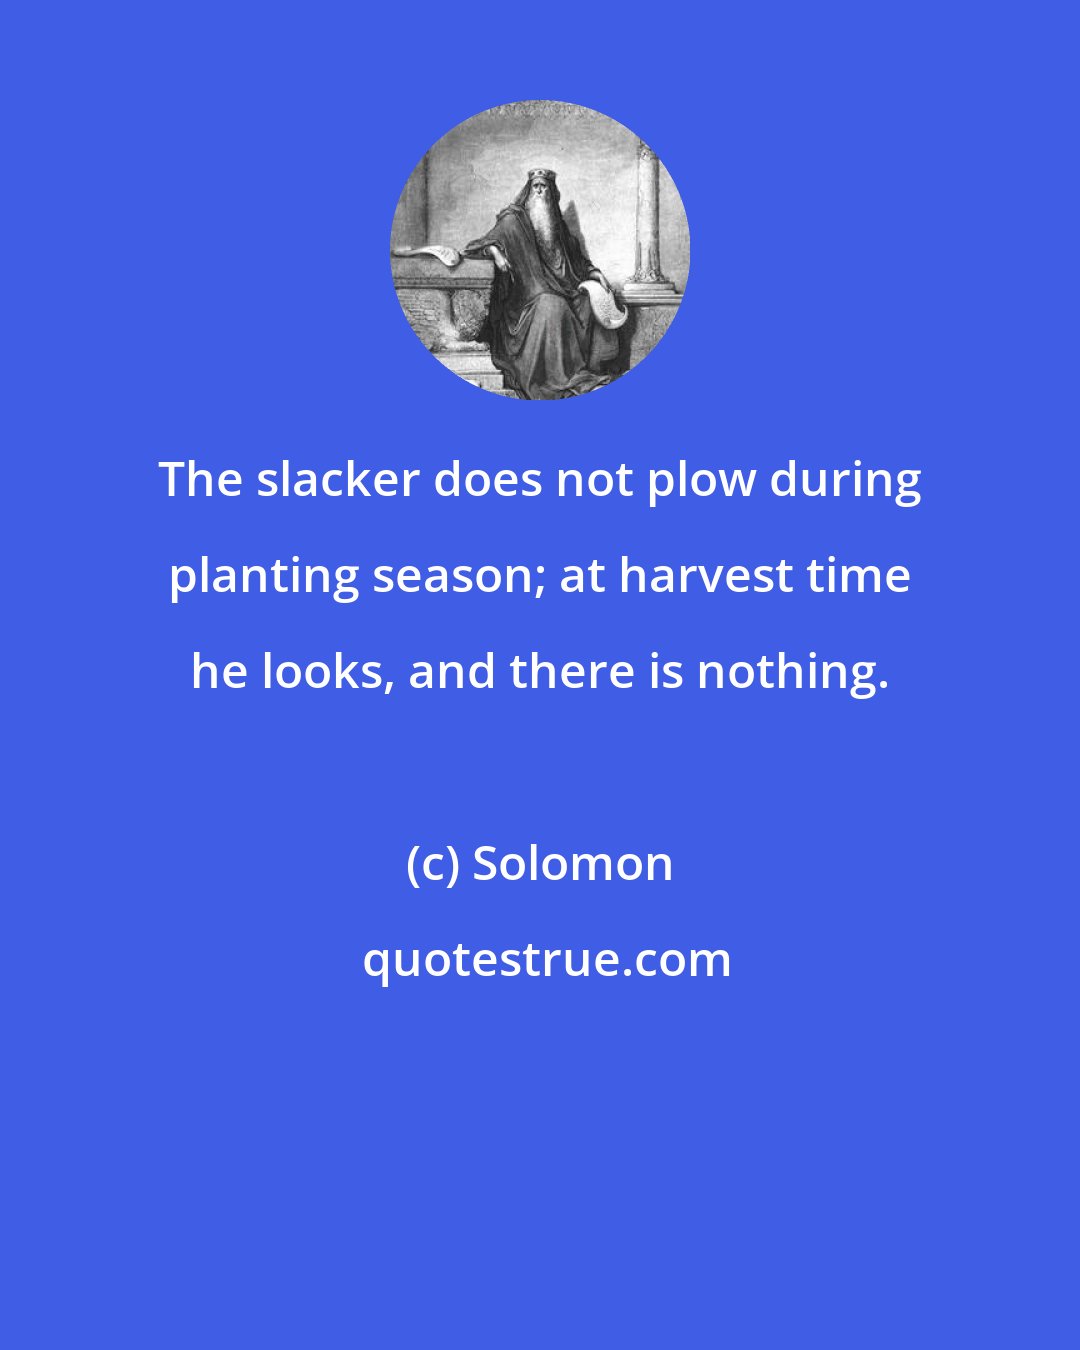 Solomon: The slacker does not plow during planting season; at harvest time he looks, and there is nothing.